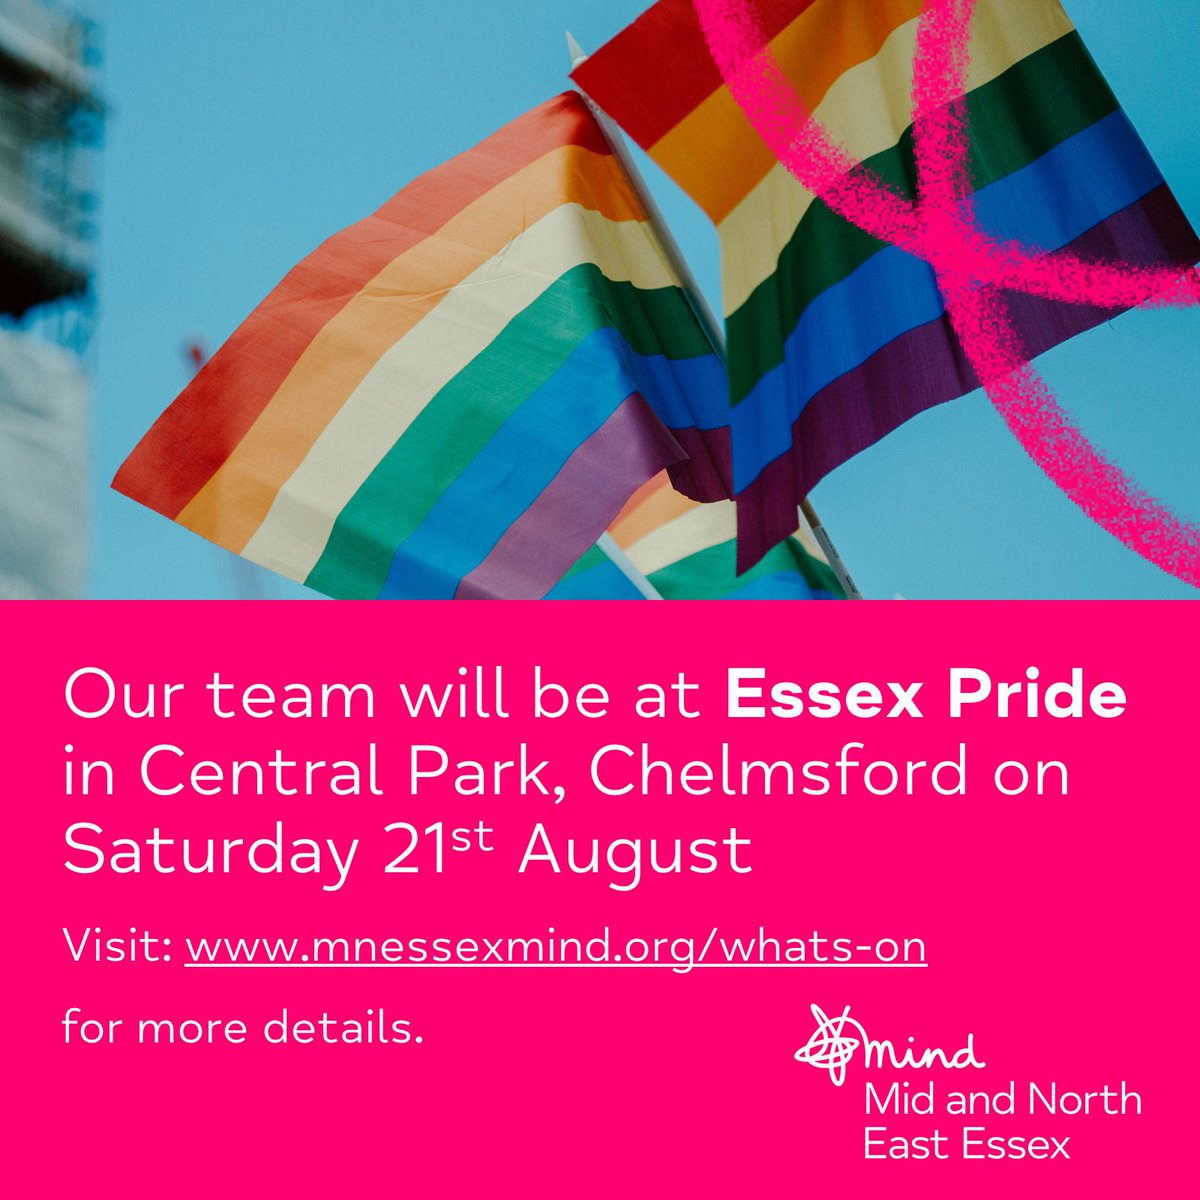 #EssexPride is nearly upon us and our team will be there to support this fantastic event. Come say hi - we'll be giving out some special Pride goodies! 🌈🏳️‍🌈